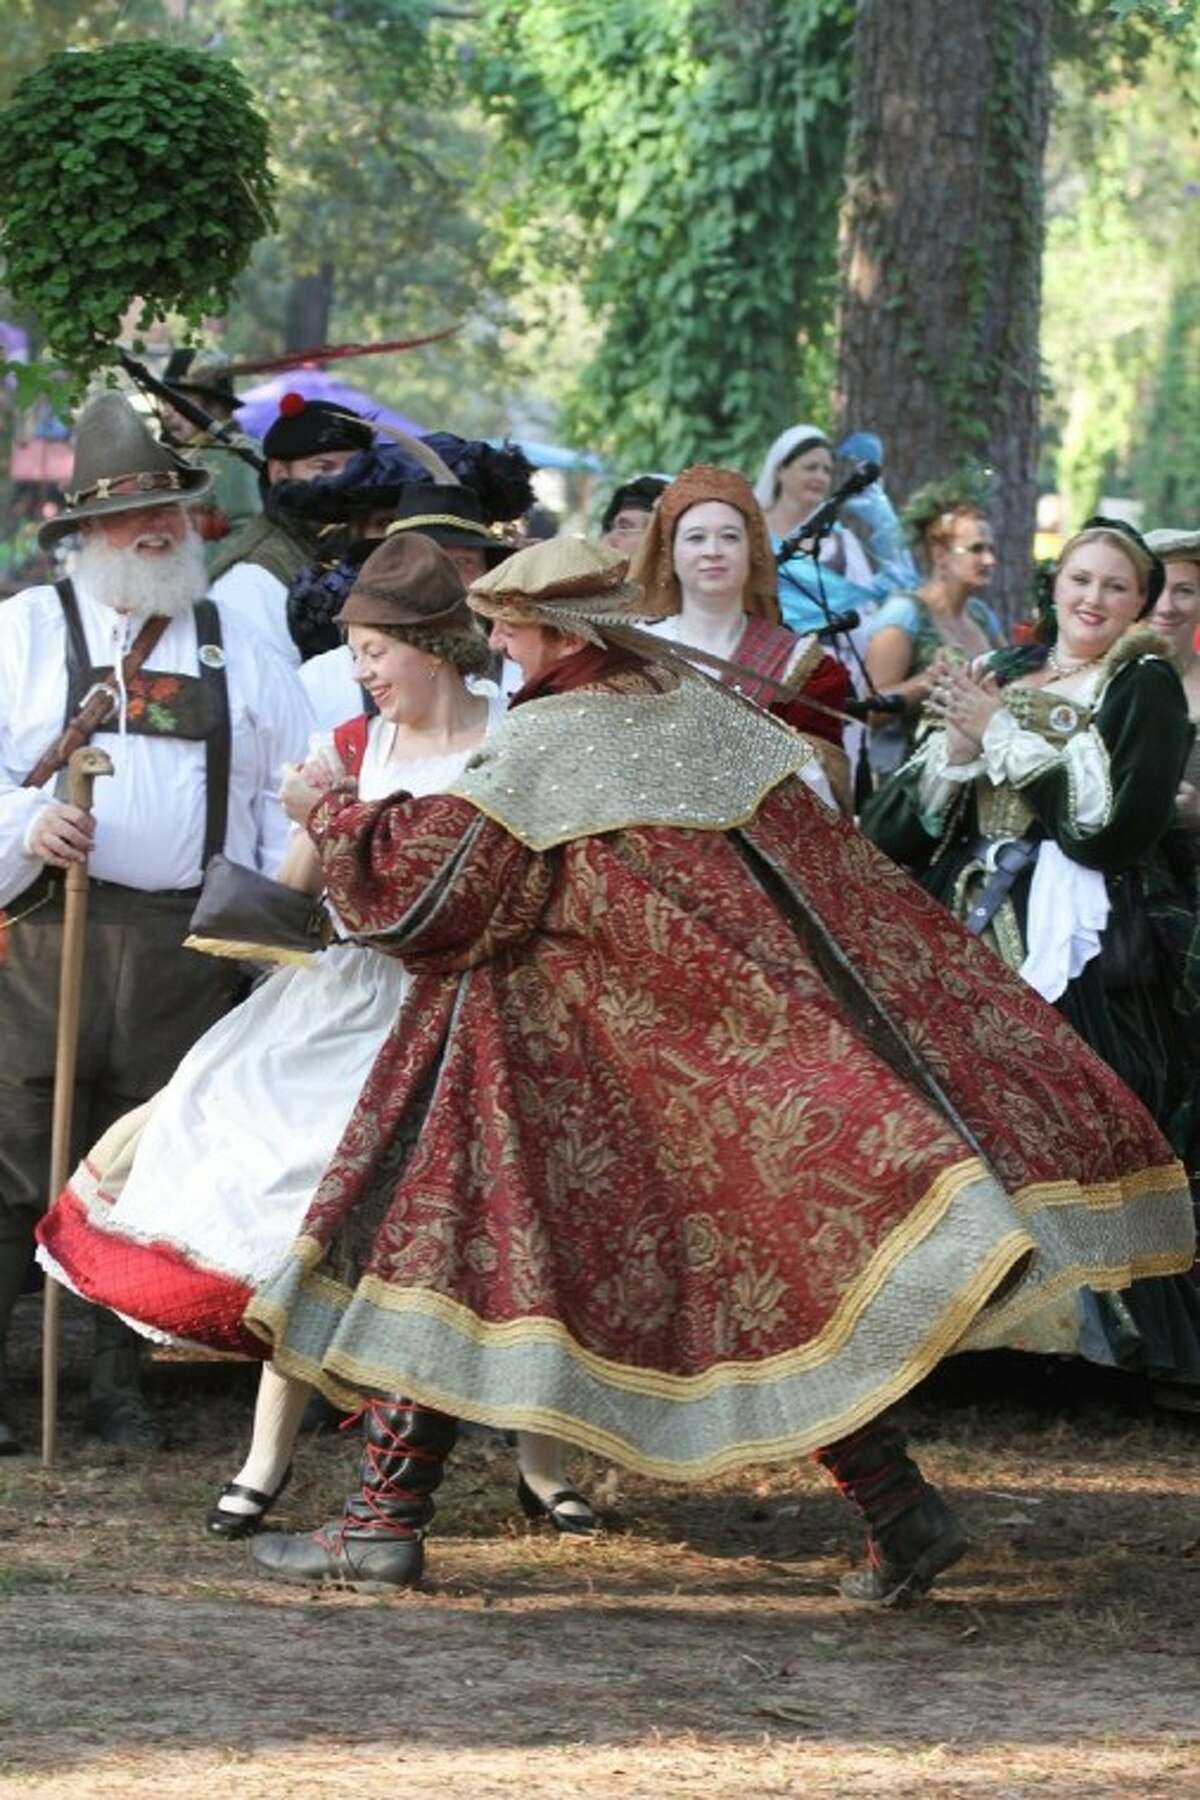 Jennie Zurovetz, aka Katarina Havener, Lady-in-Waiting, dances with Gregory Taylor, King of the Festival, at the Texas Renaissance Festival.